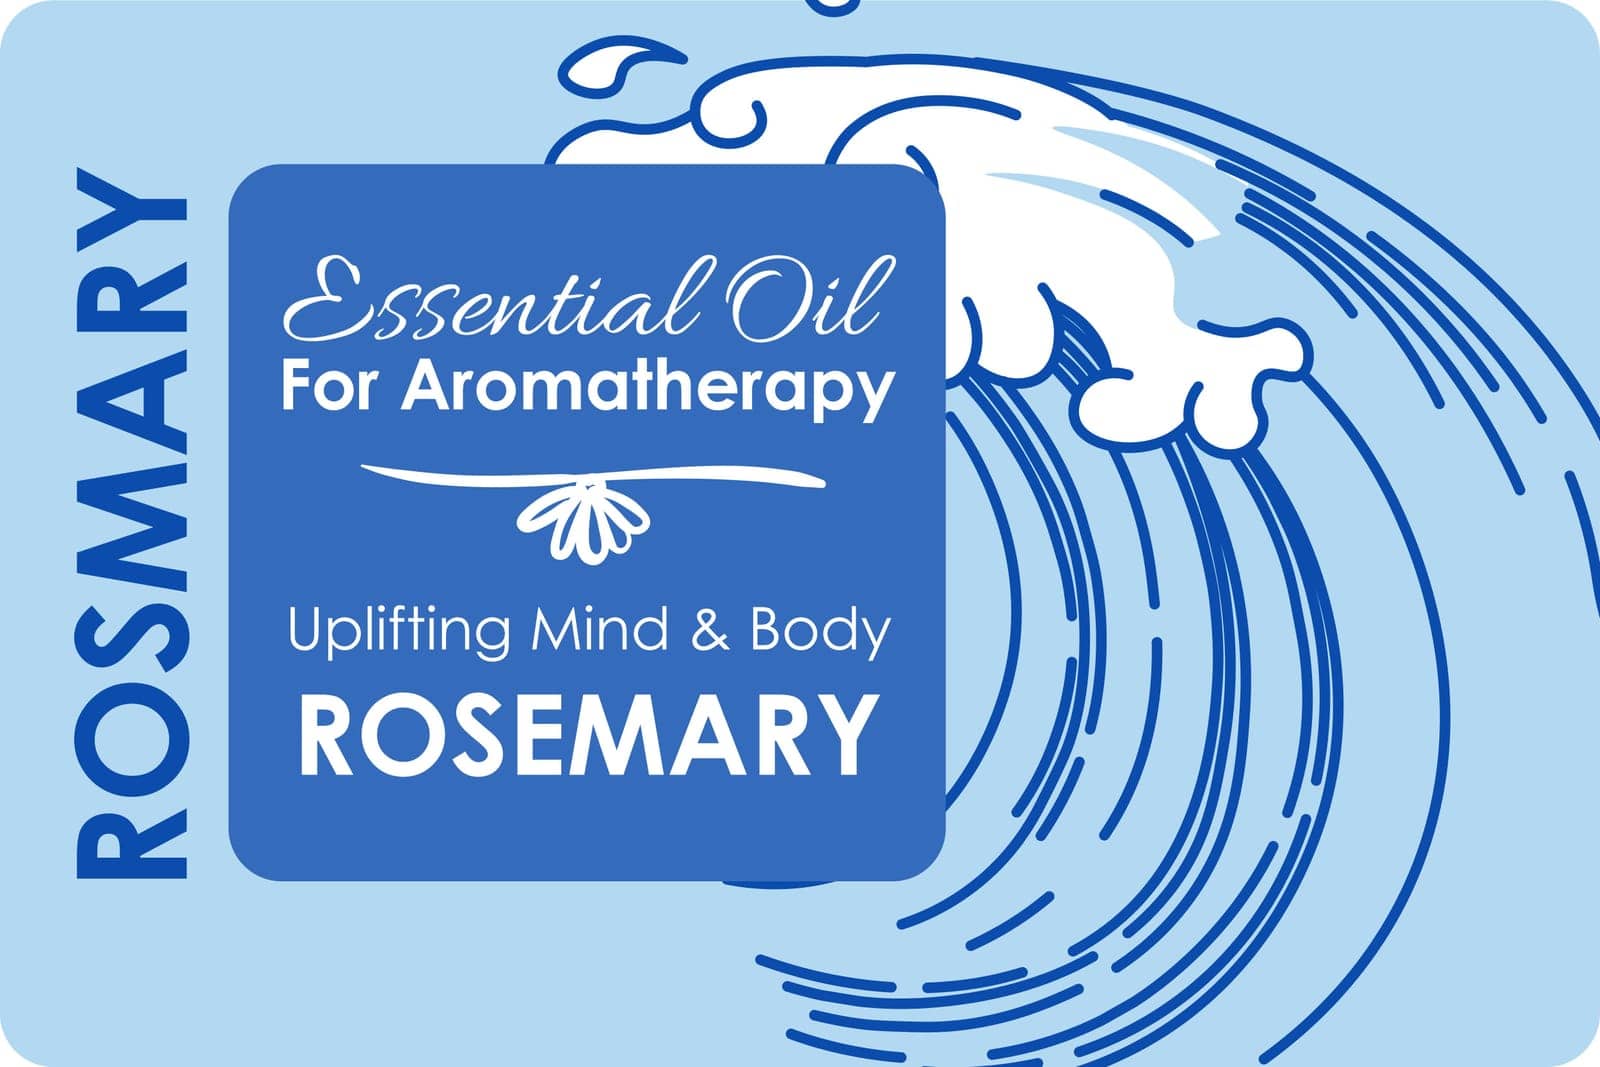 Rosemary essential oil for aromatherapy vector by Sonulkaster